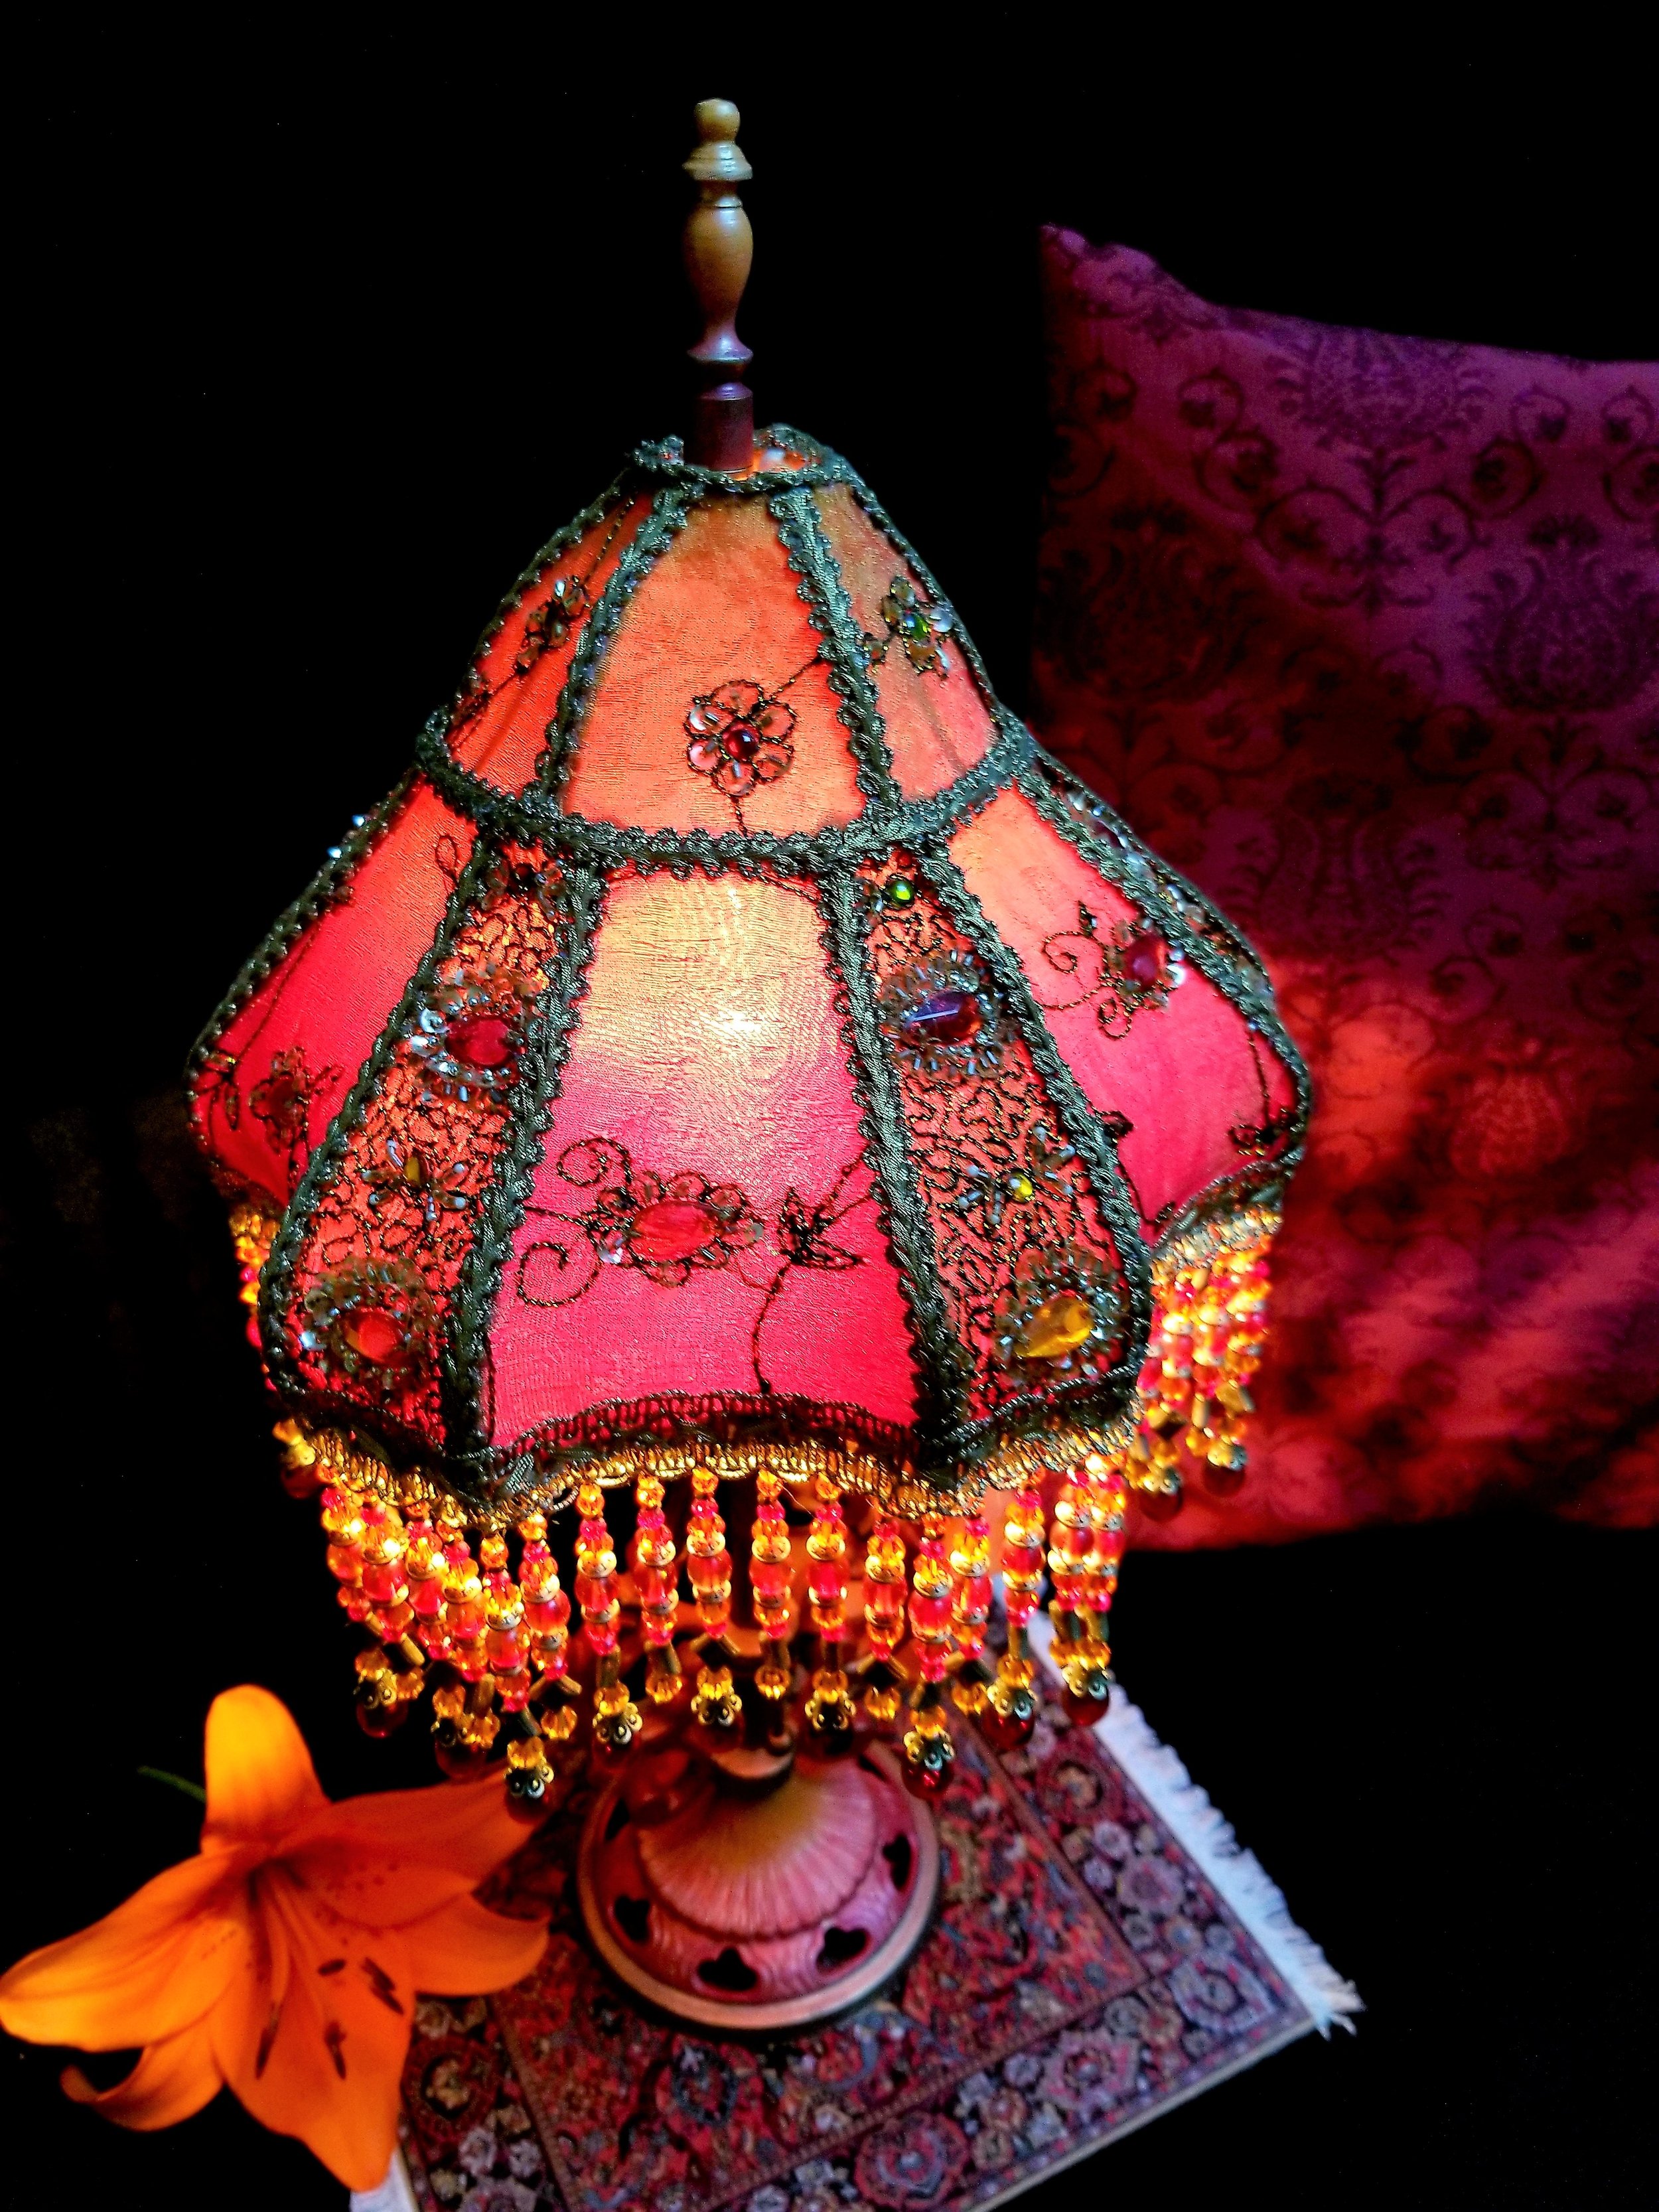 Indian Jewel Antique Lamp and Vintage Style Victorian Lampshade